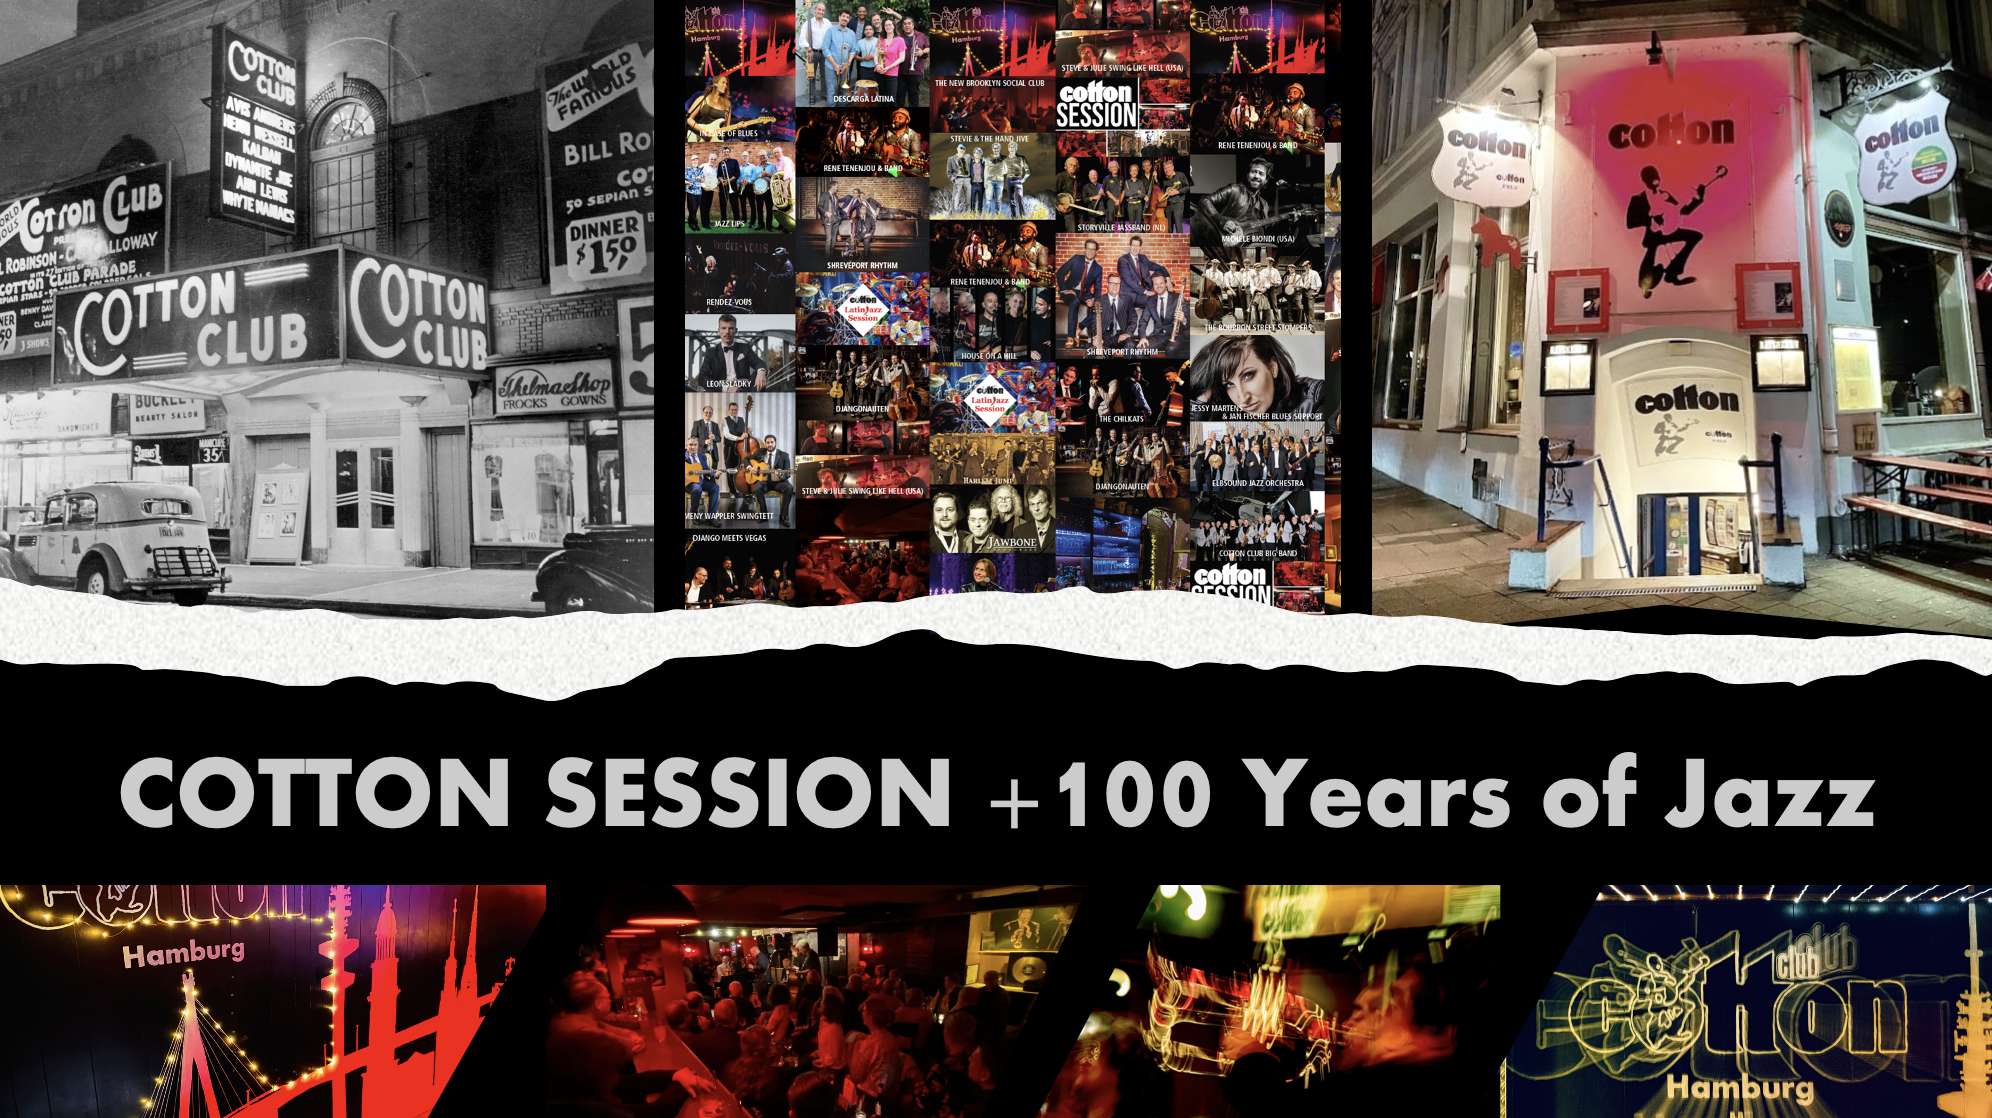 COTTON SESSION +100 YEARS OF JAZZ - led by Hauke Strebel (New Orleans)